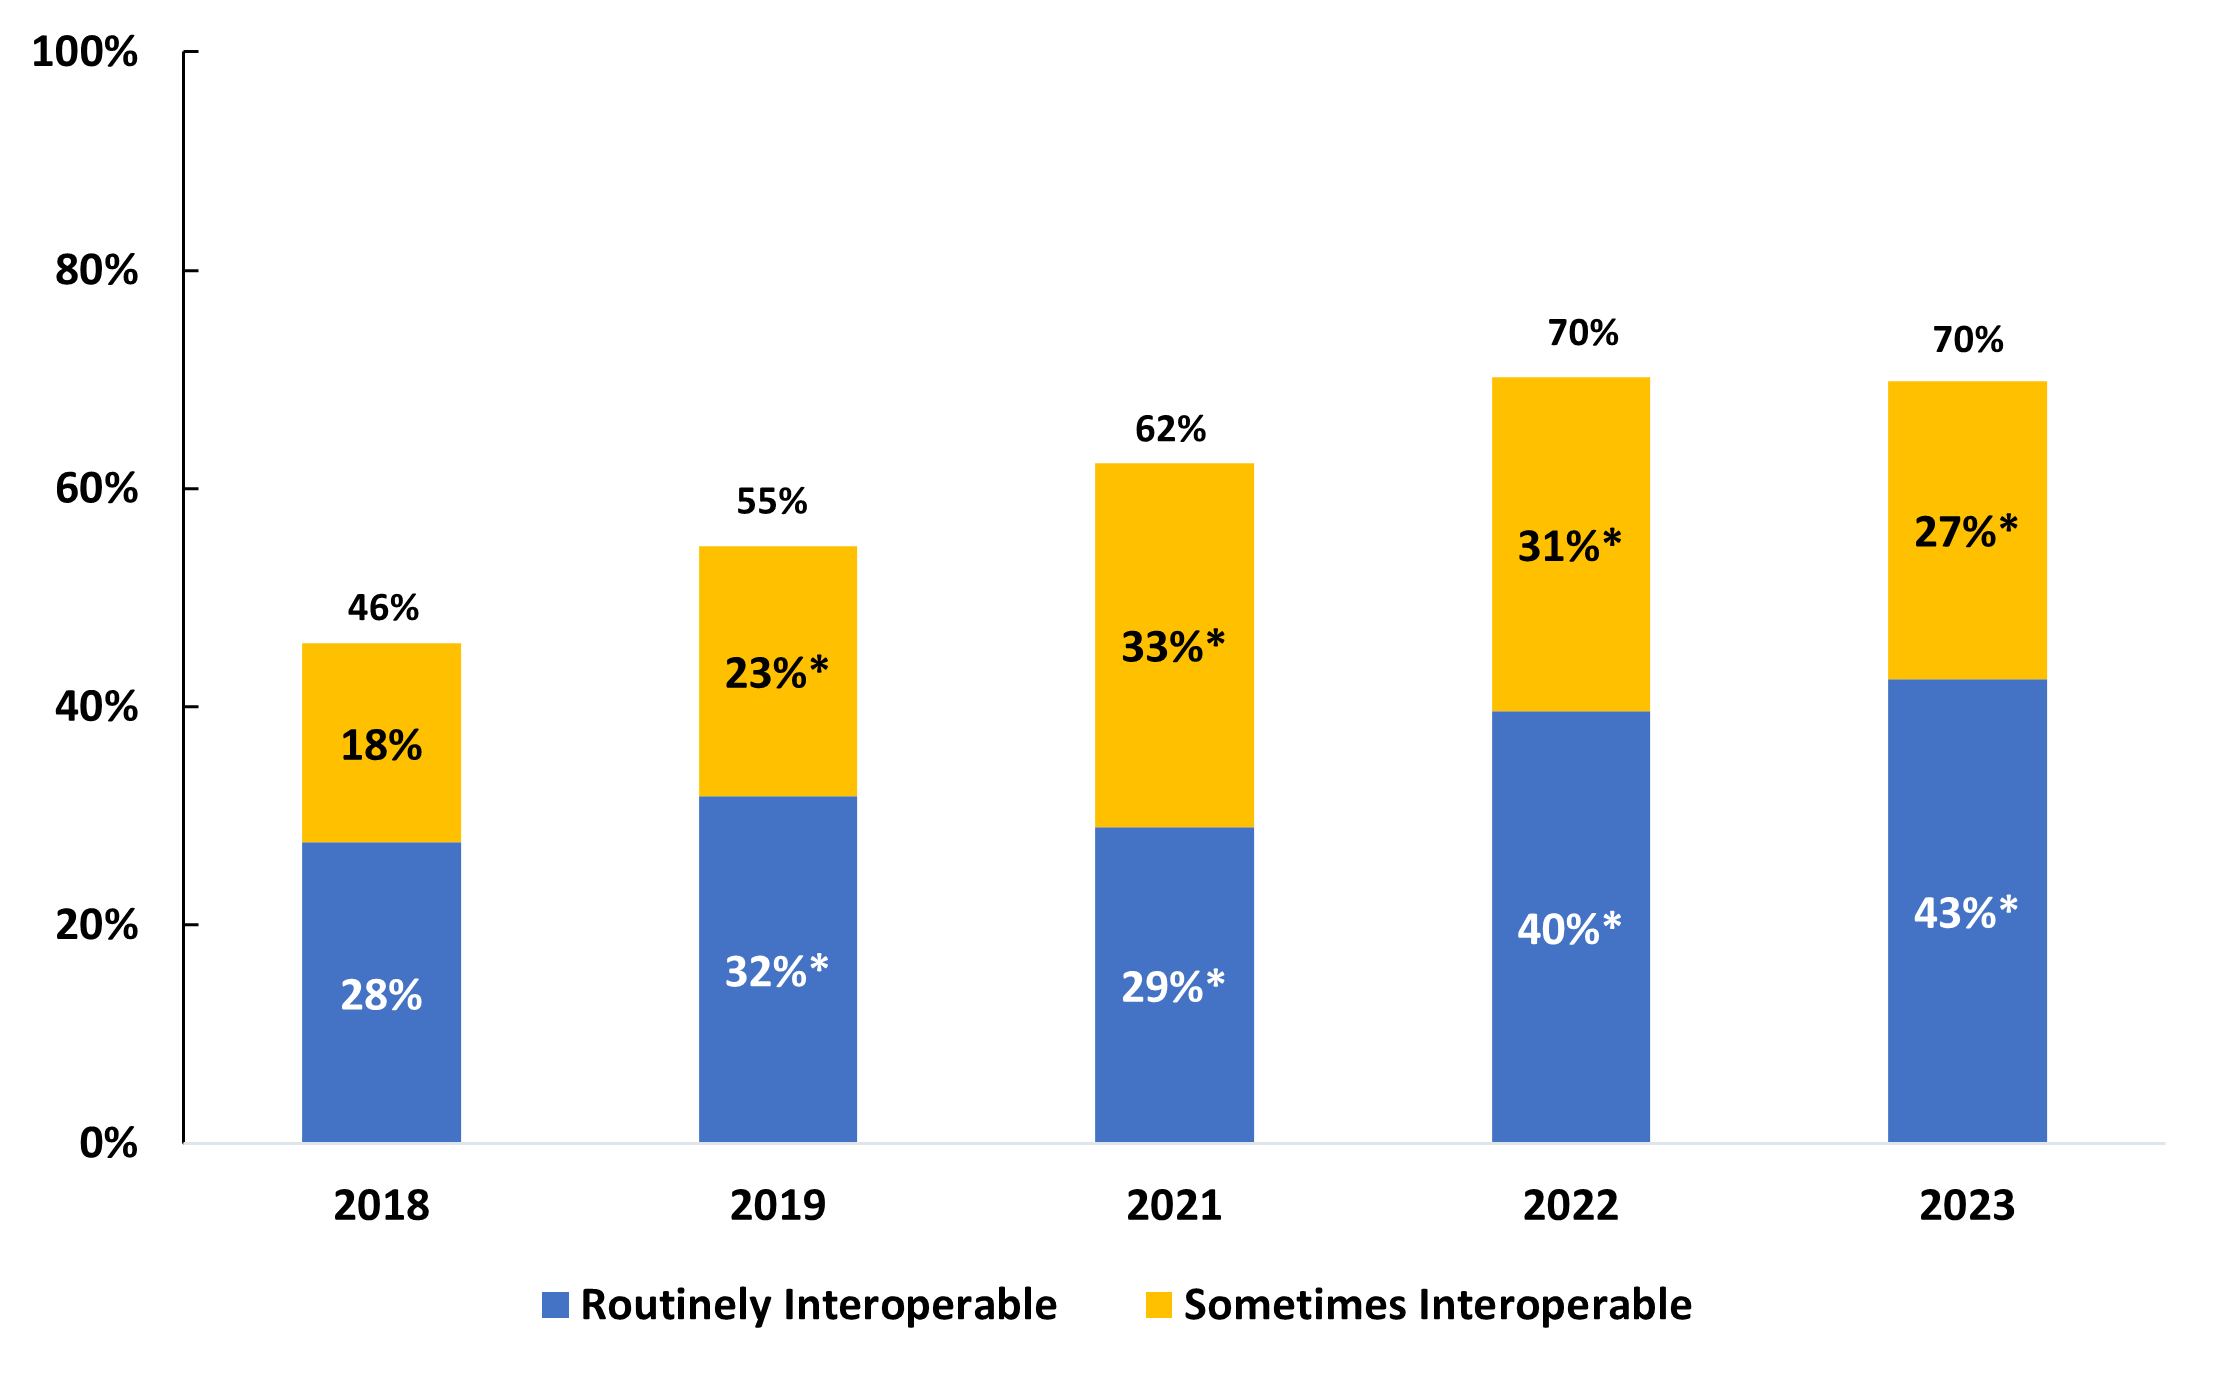 This figure is a bar chart illustrating the percentage of hospitals that routinely and sometimes engage in interoperable exchange. Routine engagement grows from 28% in 2018 to 43% in 2023, while sometimes engagement shows a decline from 20% in 2018 to 13% in 2023. The chart highlights the increasing commitment of hospitals towards maintaining higher standards of interoperability.